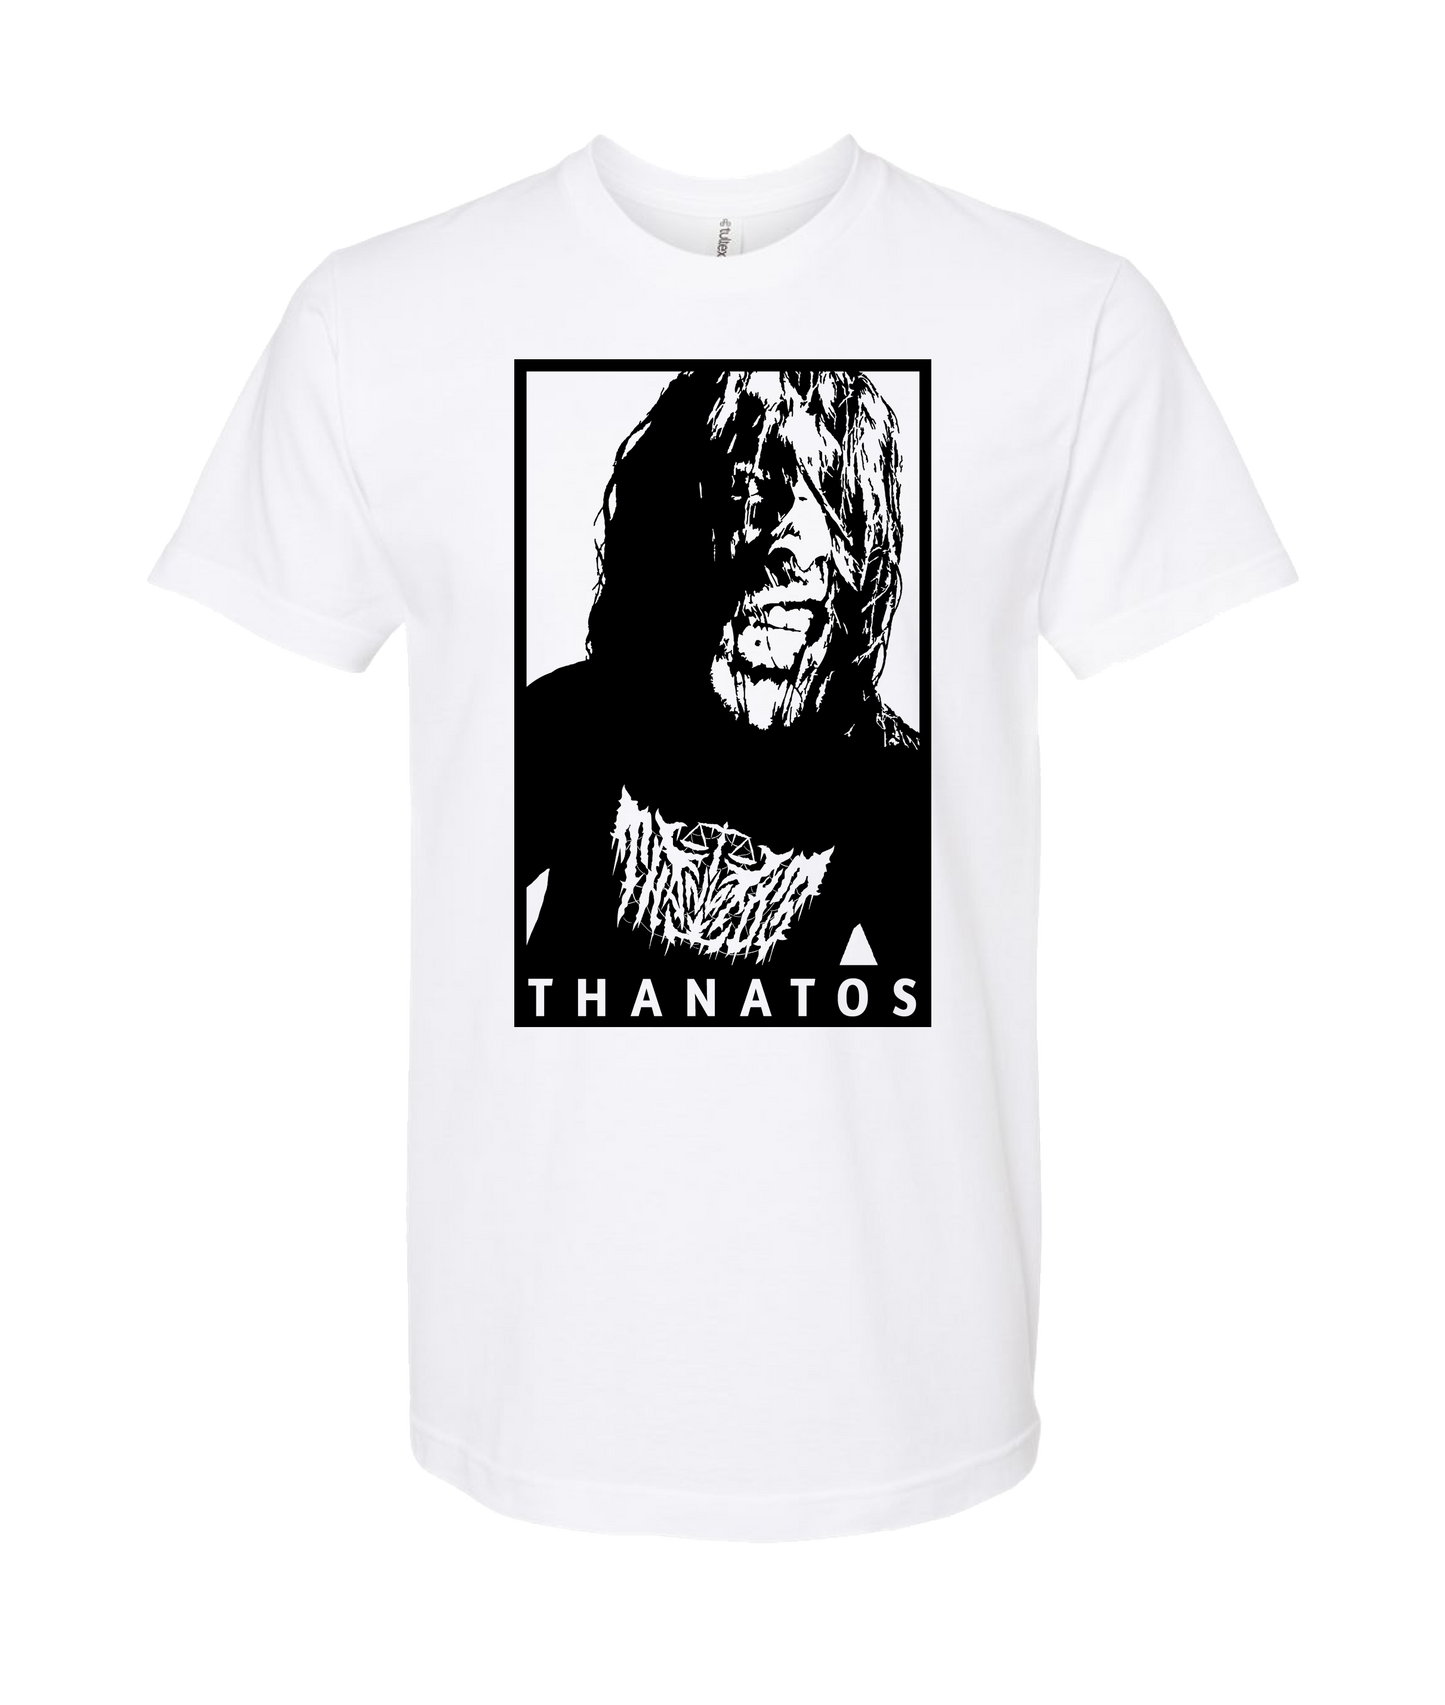 Thanatos - Better the Devil You Know Than the One You Don't - White T Shirt